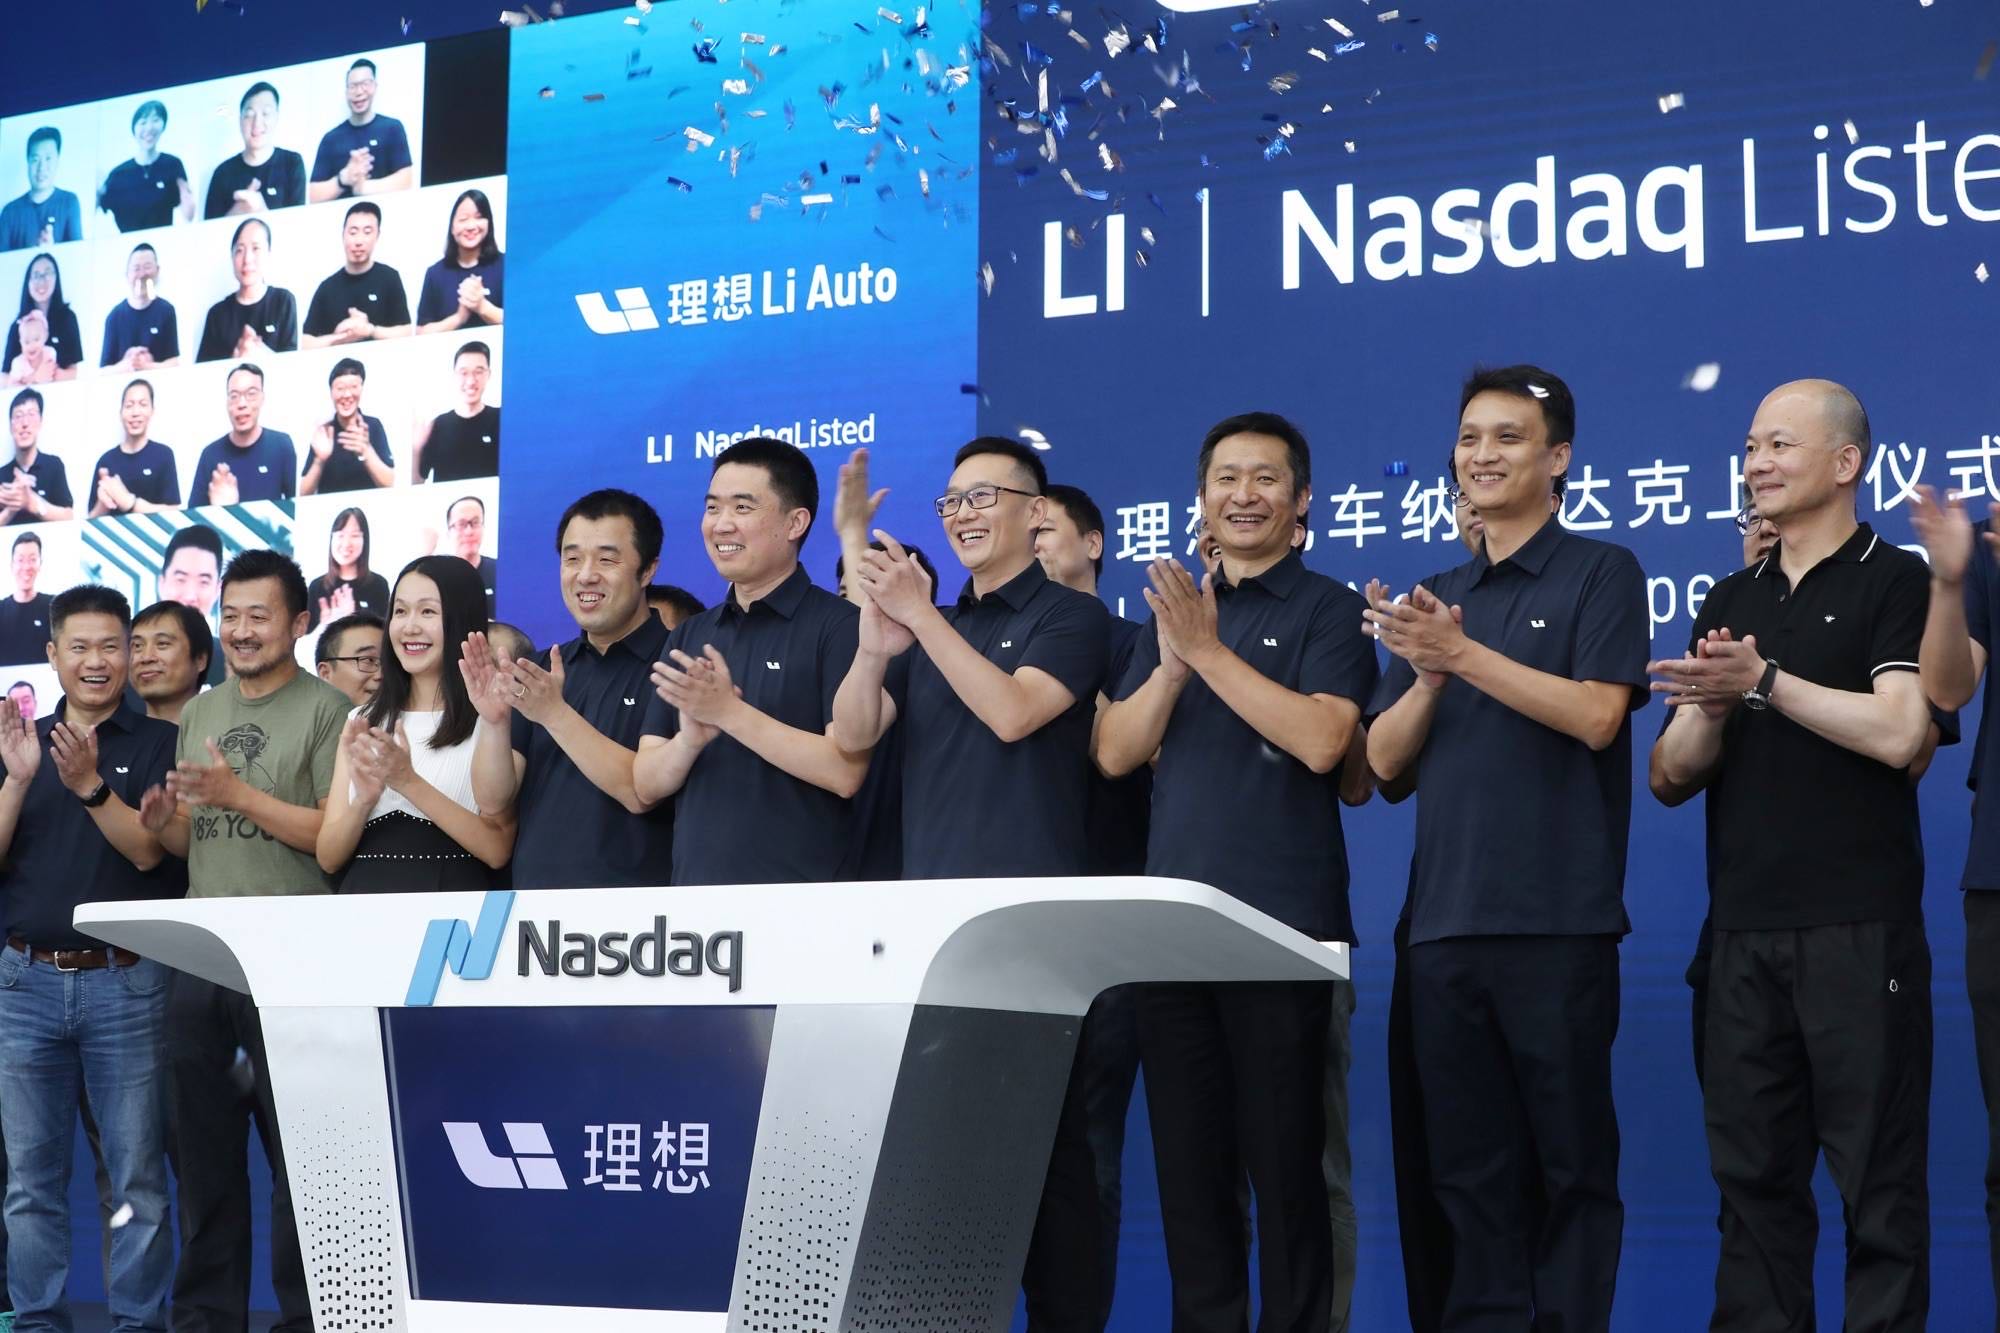 Full coverage of Li Xiang's IPO speech | Exclusive video